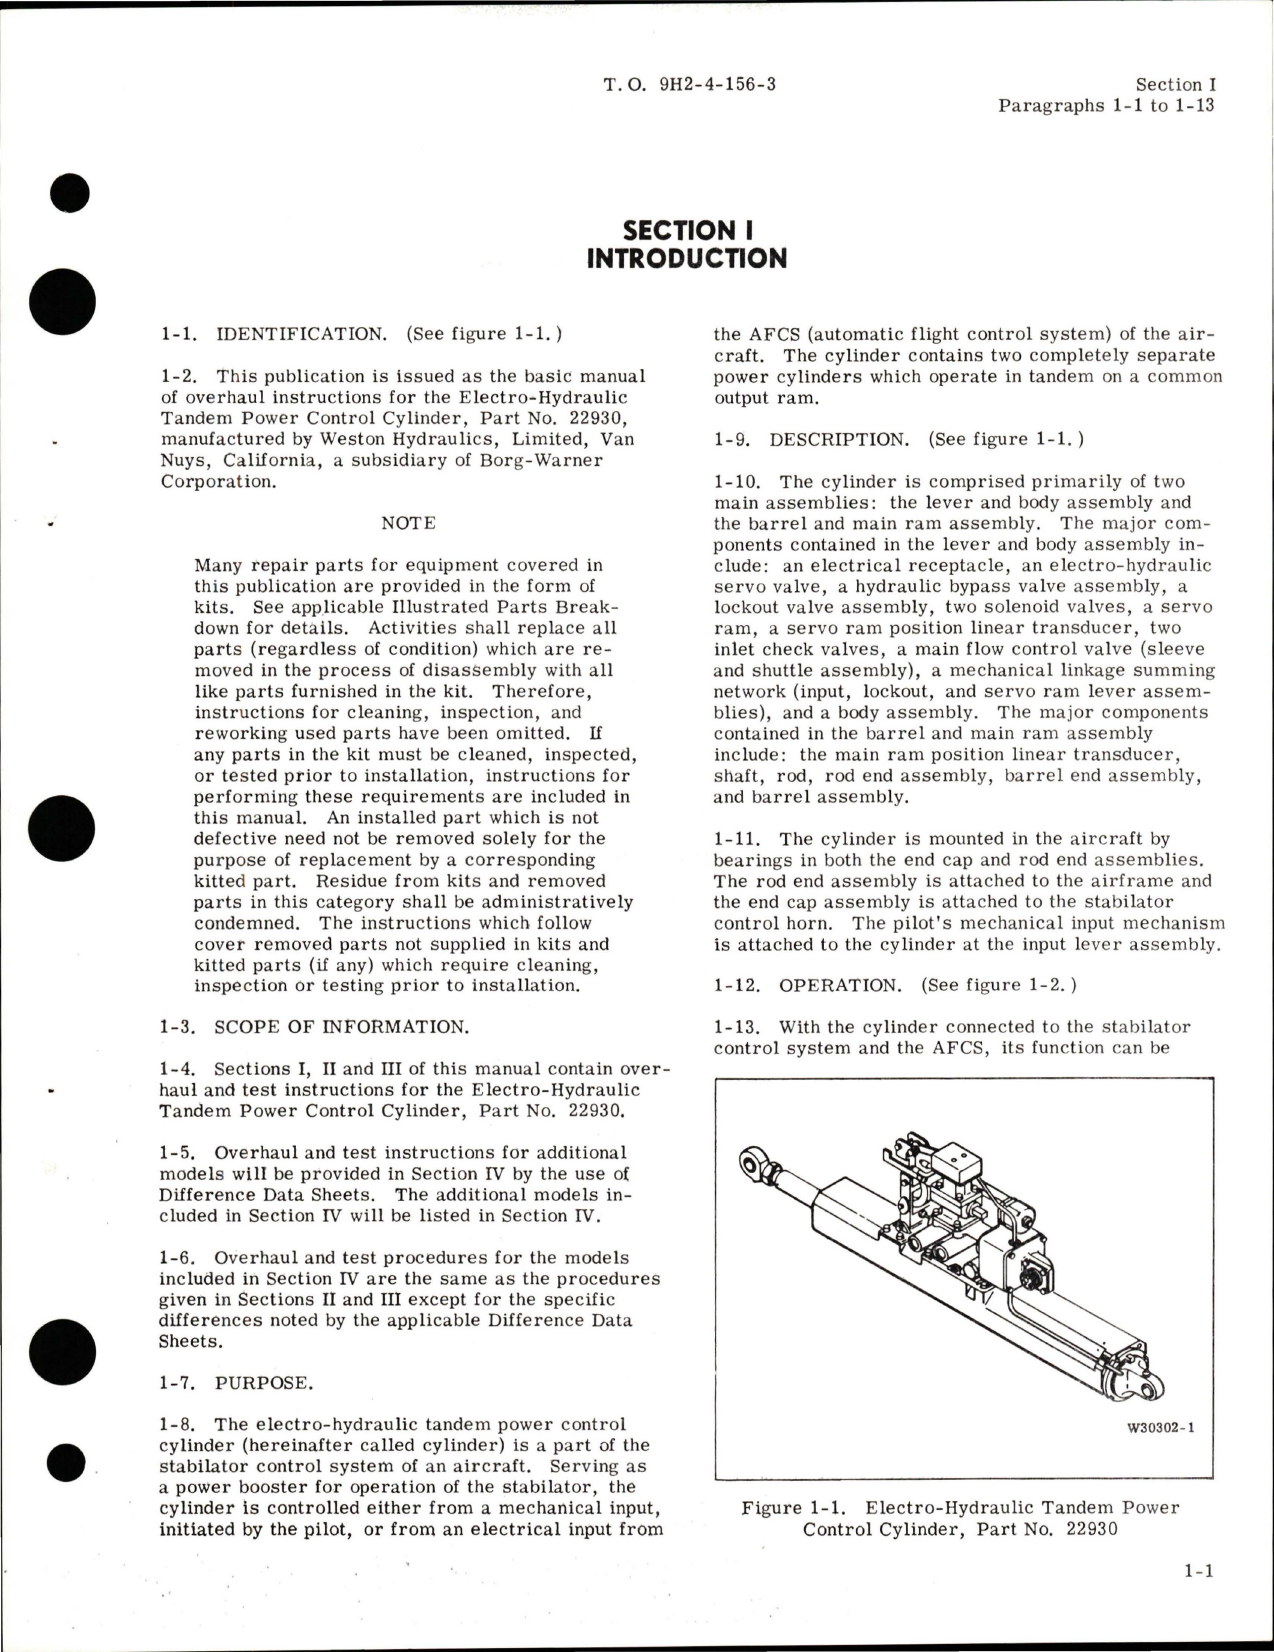 Sample page 5 from AirCorps Library document: Overhaul Instructions for Electro-Hydraulic Tandem Power Control Cylinder - Part 22930 and 22930-1